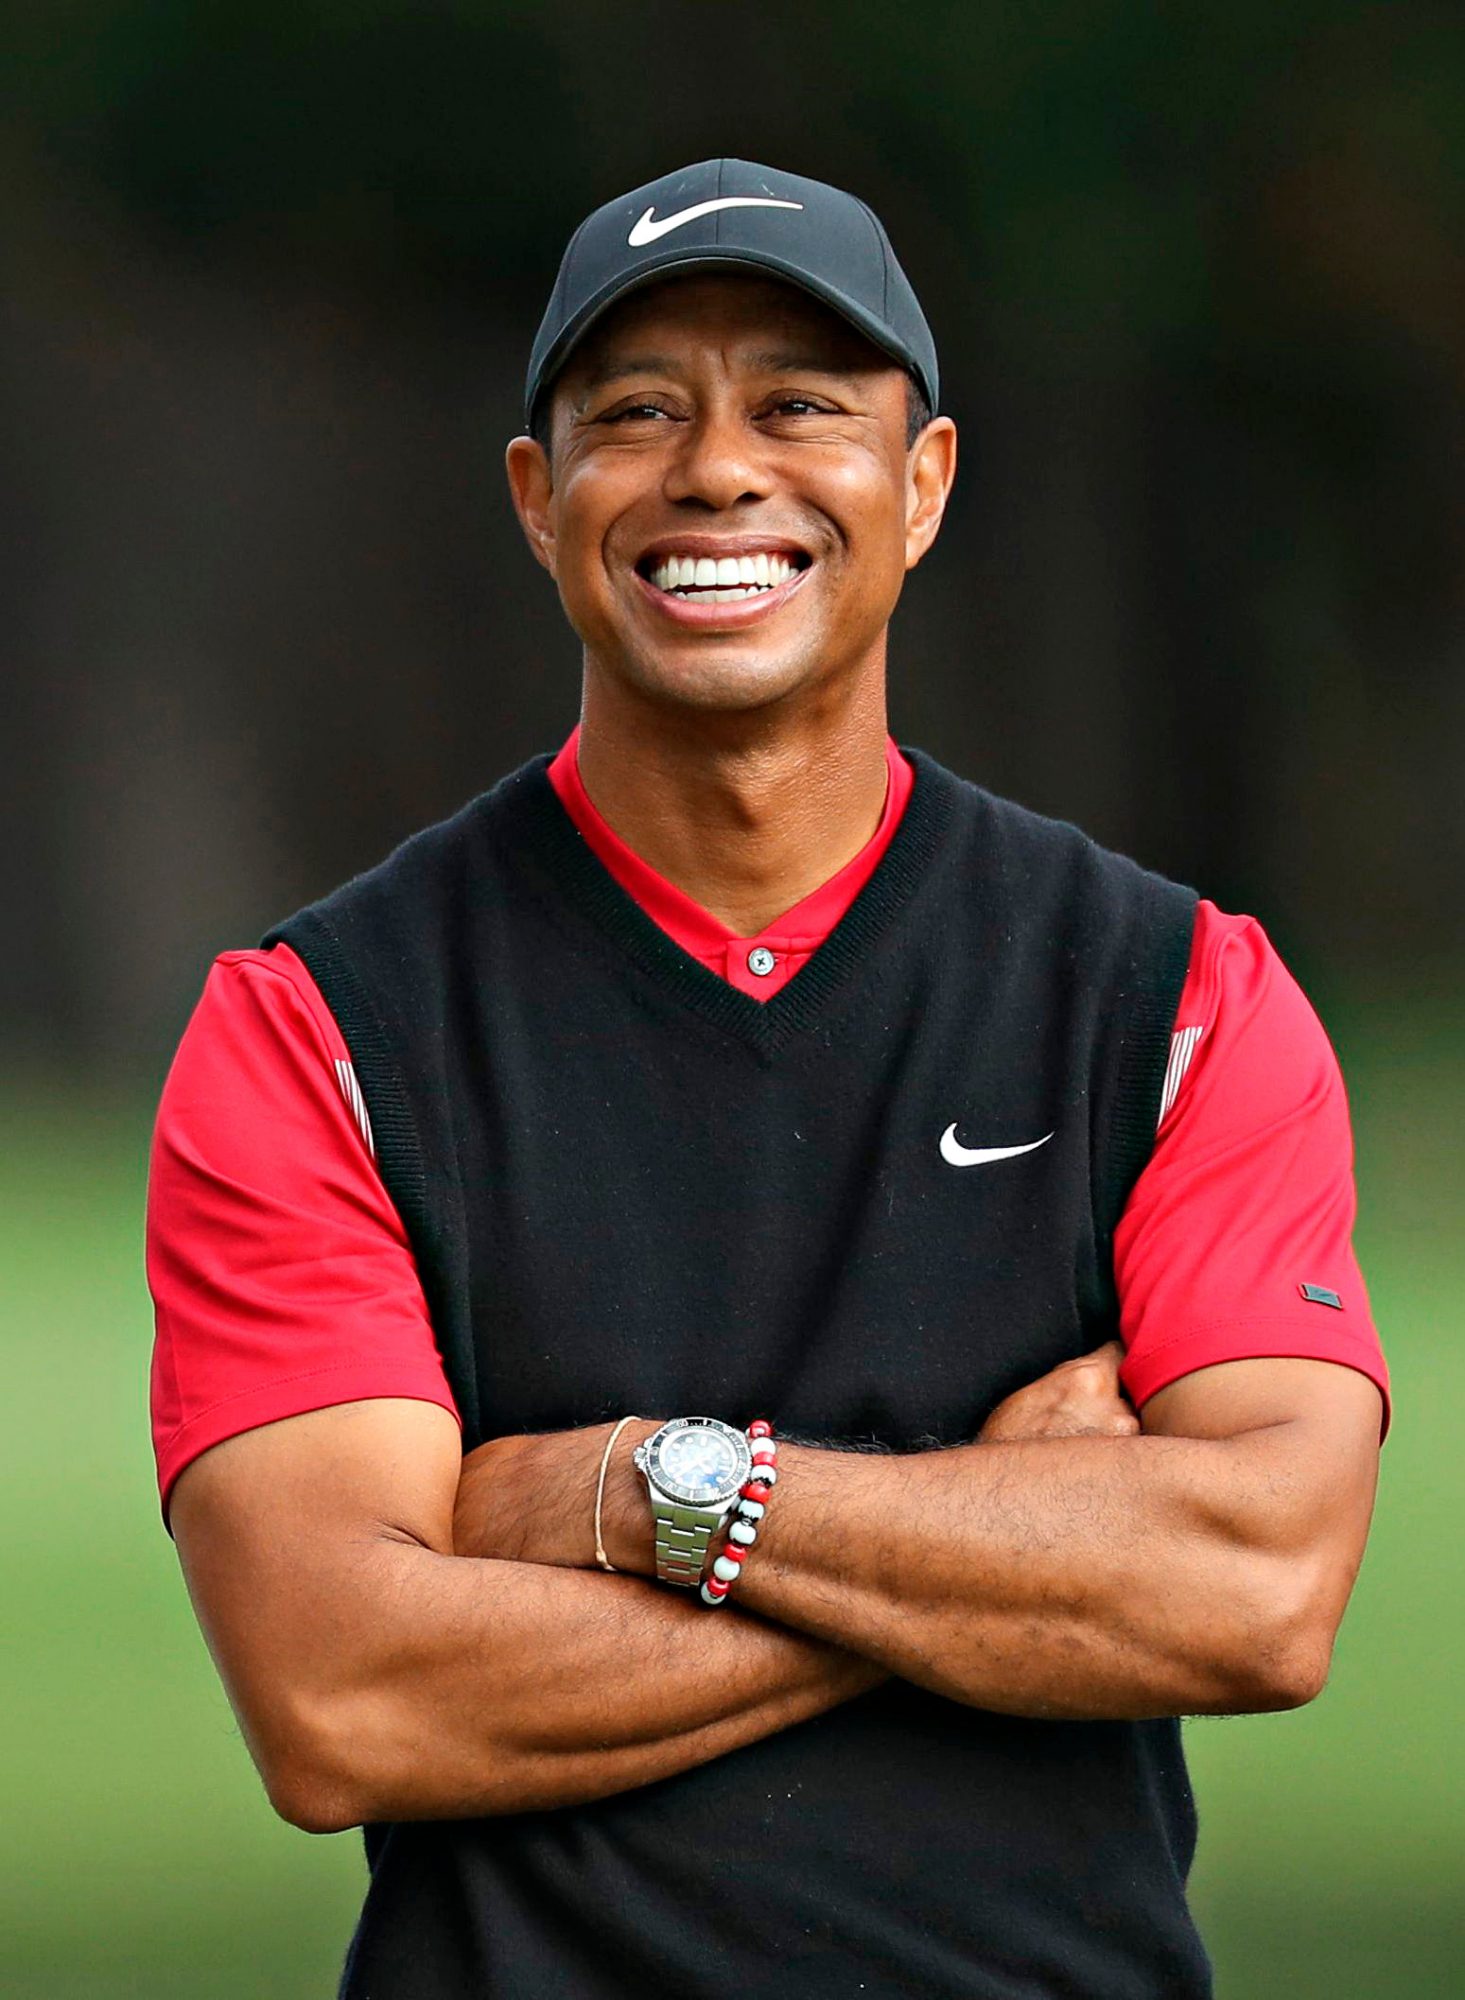 Short Biography For My Role Model: Tiger Woods